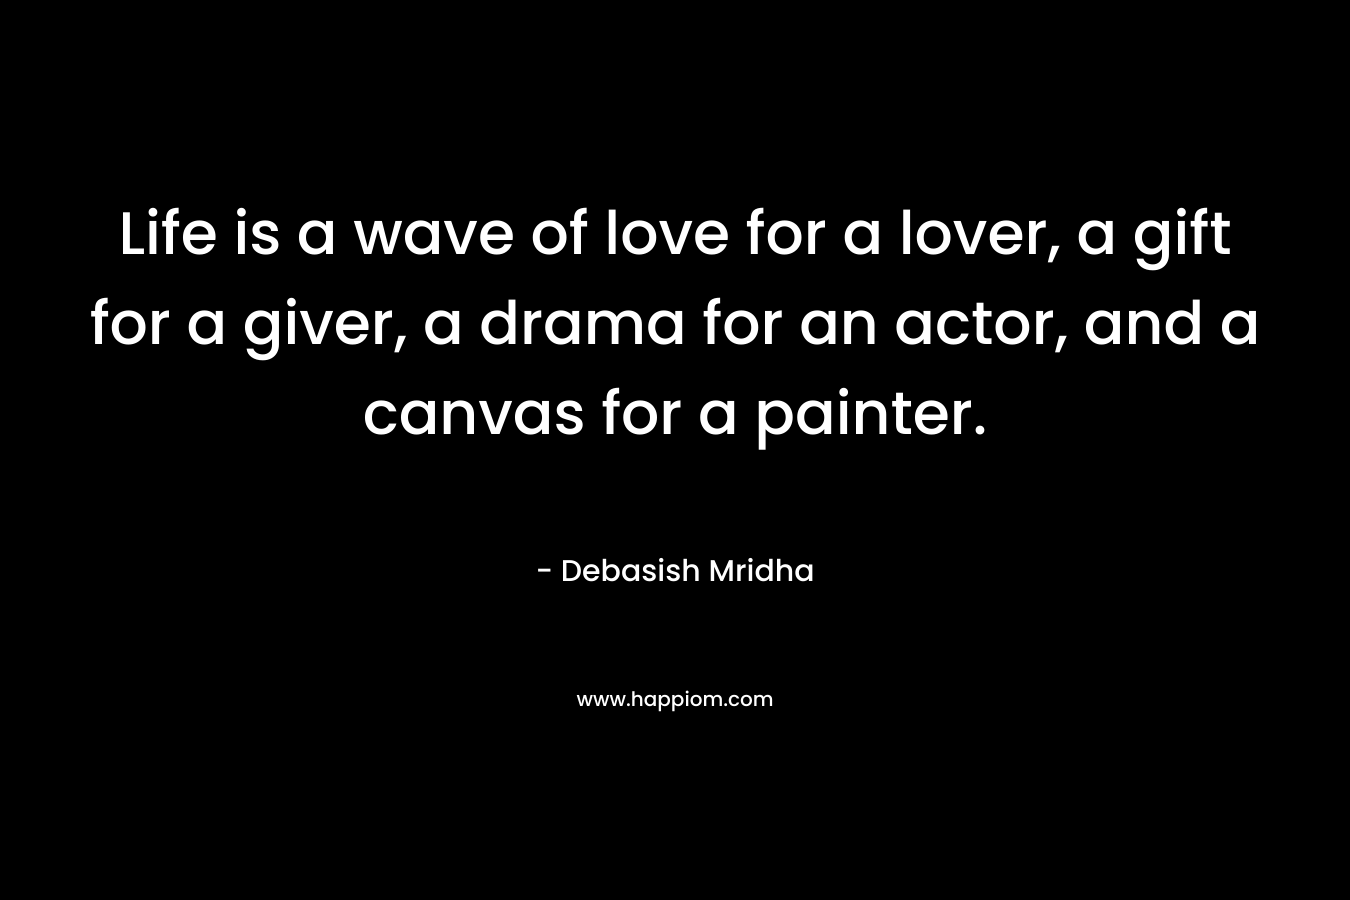 Life is a wave of love for a lover, a gift for a giver, a drama for an actor, and a canvas for a painter.